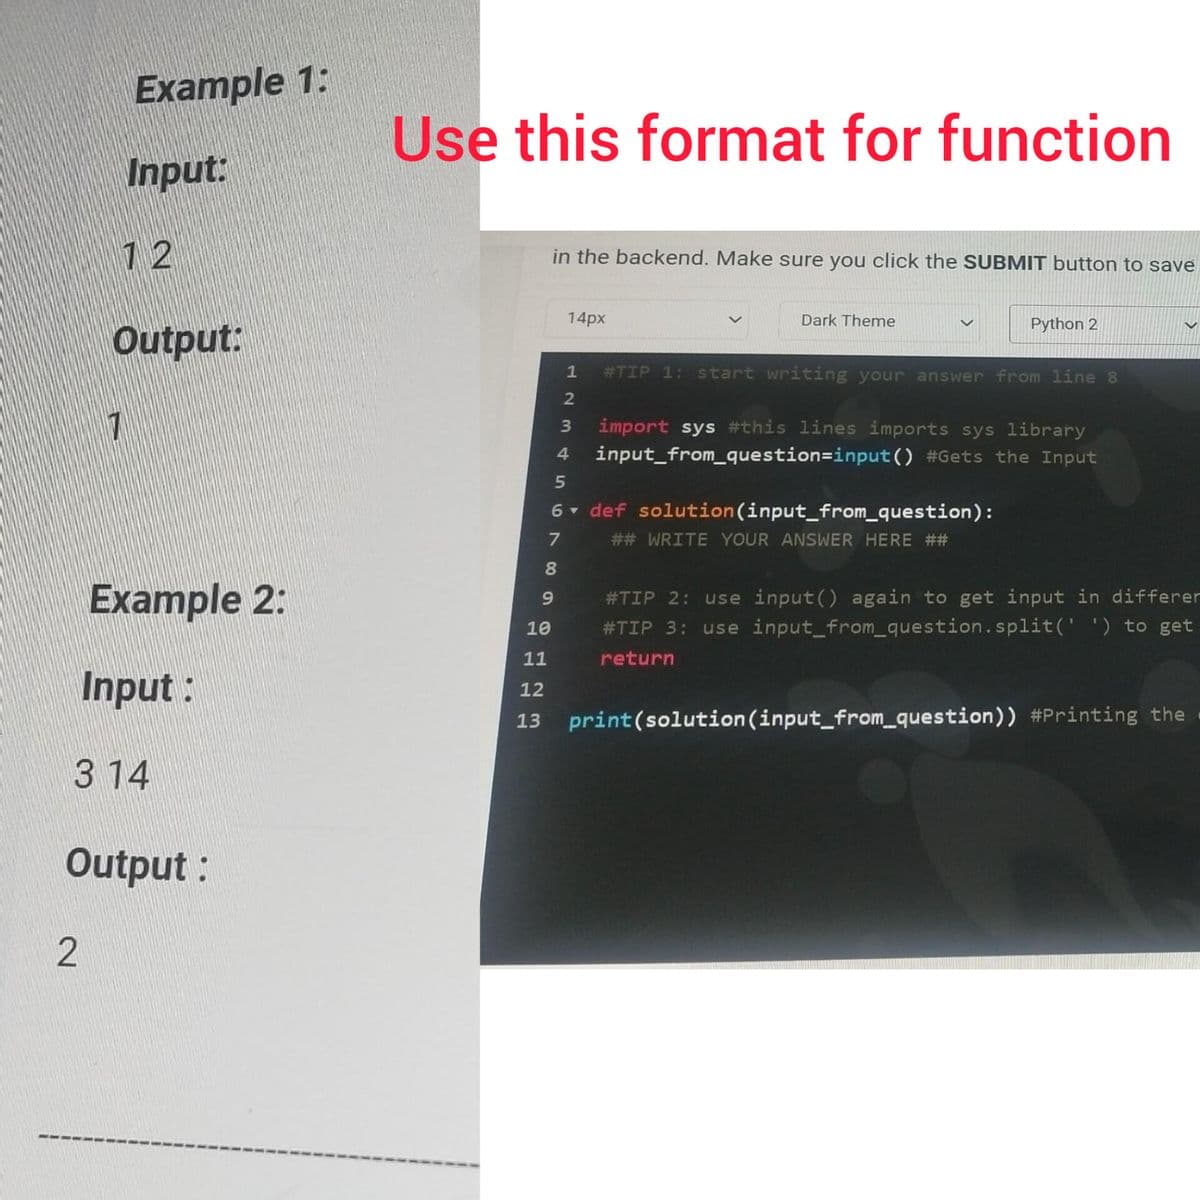 Example 1:
Input:
12
2
Output:
7
Example 2:
Input:
3 14
Output:
Use this format for function
in the backend. Make sure you click the SUBMIT button to save
10
6
789
14px
1 #TIP 1: start writing your answer from line 8
2
3 import sys #this lines imports sys library
4 input_from_question=input() #Gets the Input
Dark Theme
▼
Python 2
def solution (input_from_question):
## WRITE YOUR ANSWER HERE ##
#TIP 2: use input() again to get input in differen
#TIP 3: use input_from_question.split(' ') to get
return
11
12
13 print (solution (input_from_question)) #Printing the